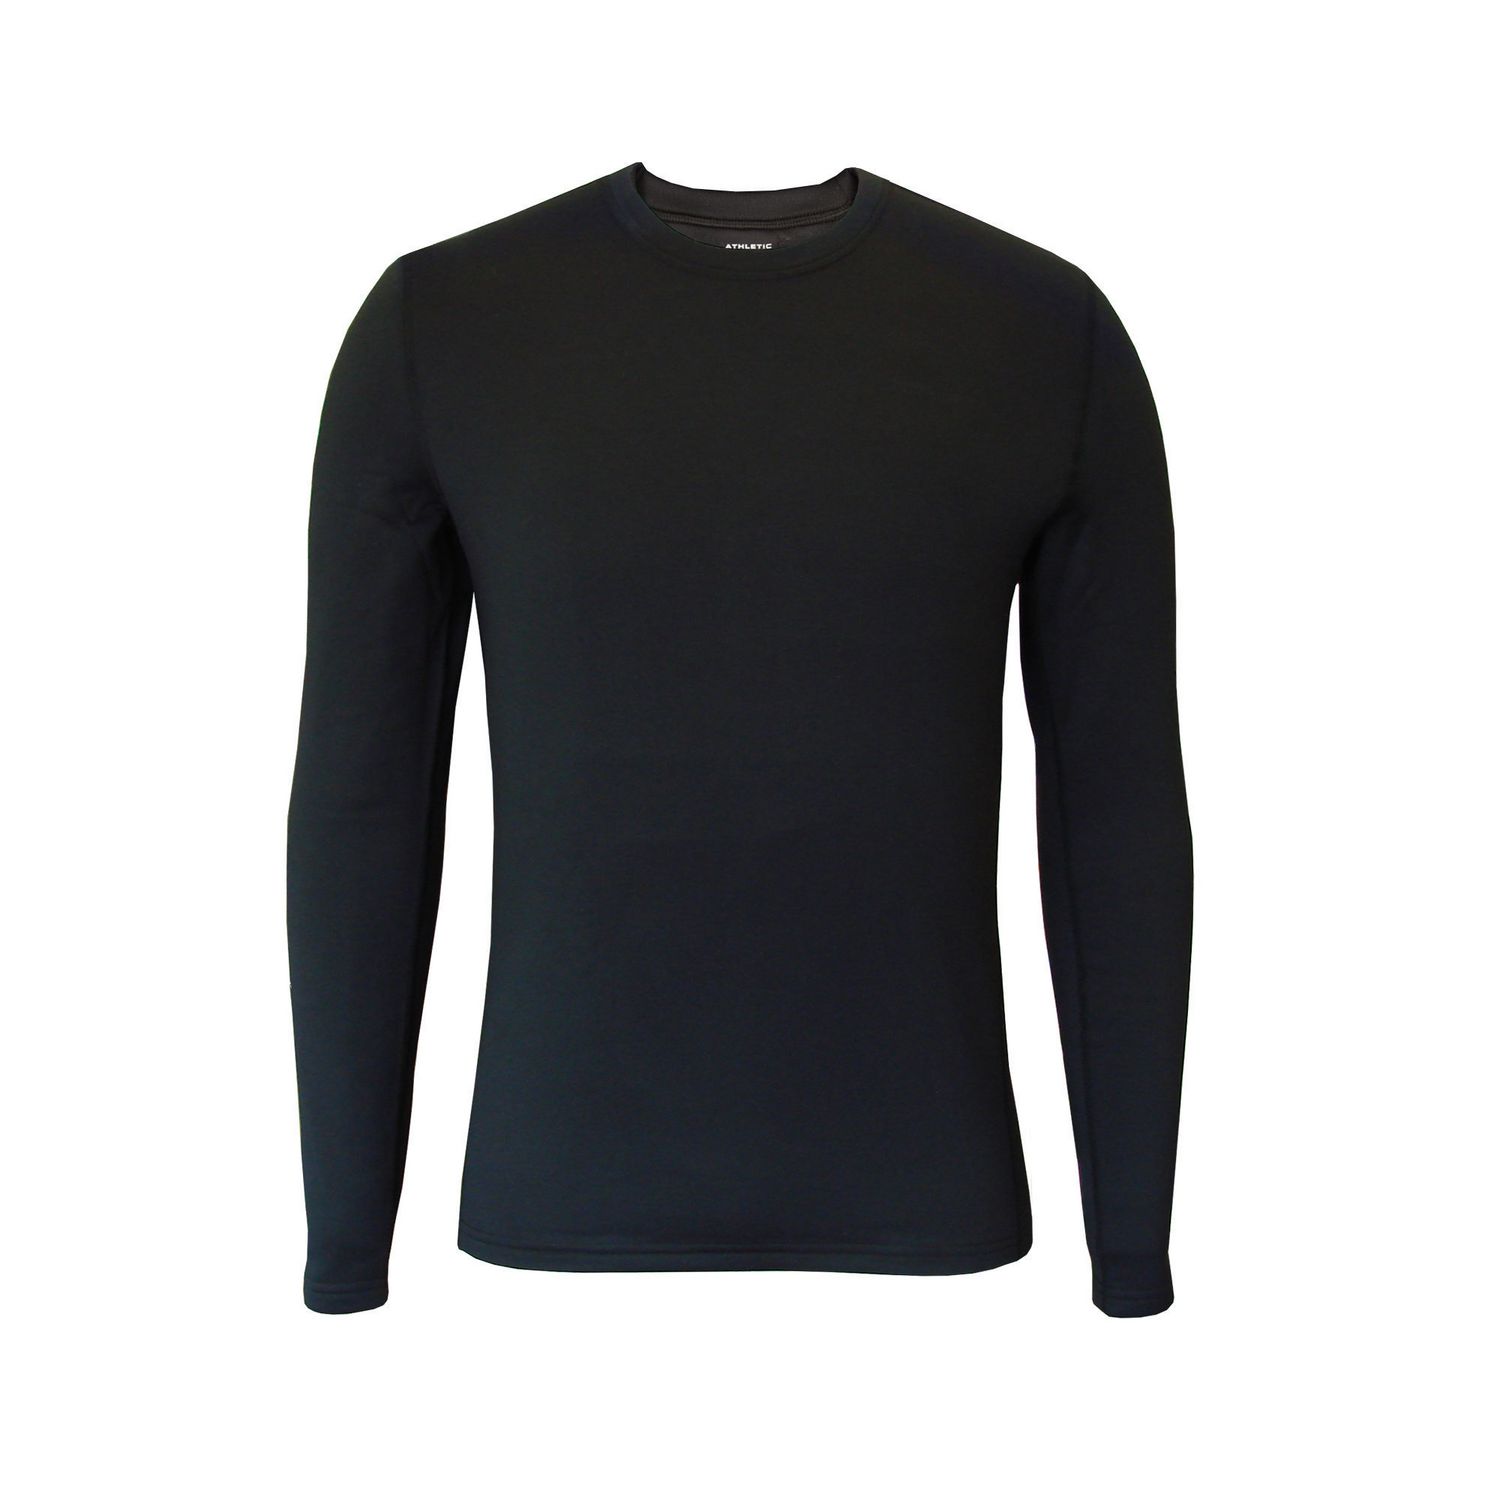 Athletic Works Men's Long Sleeve Fleece, Mid Weight Thermal Crew Neck ...